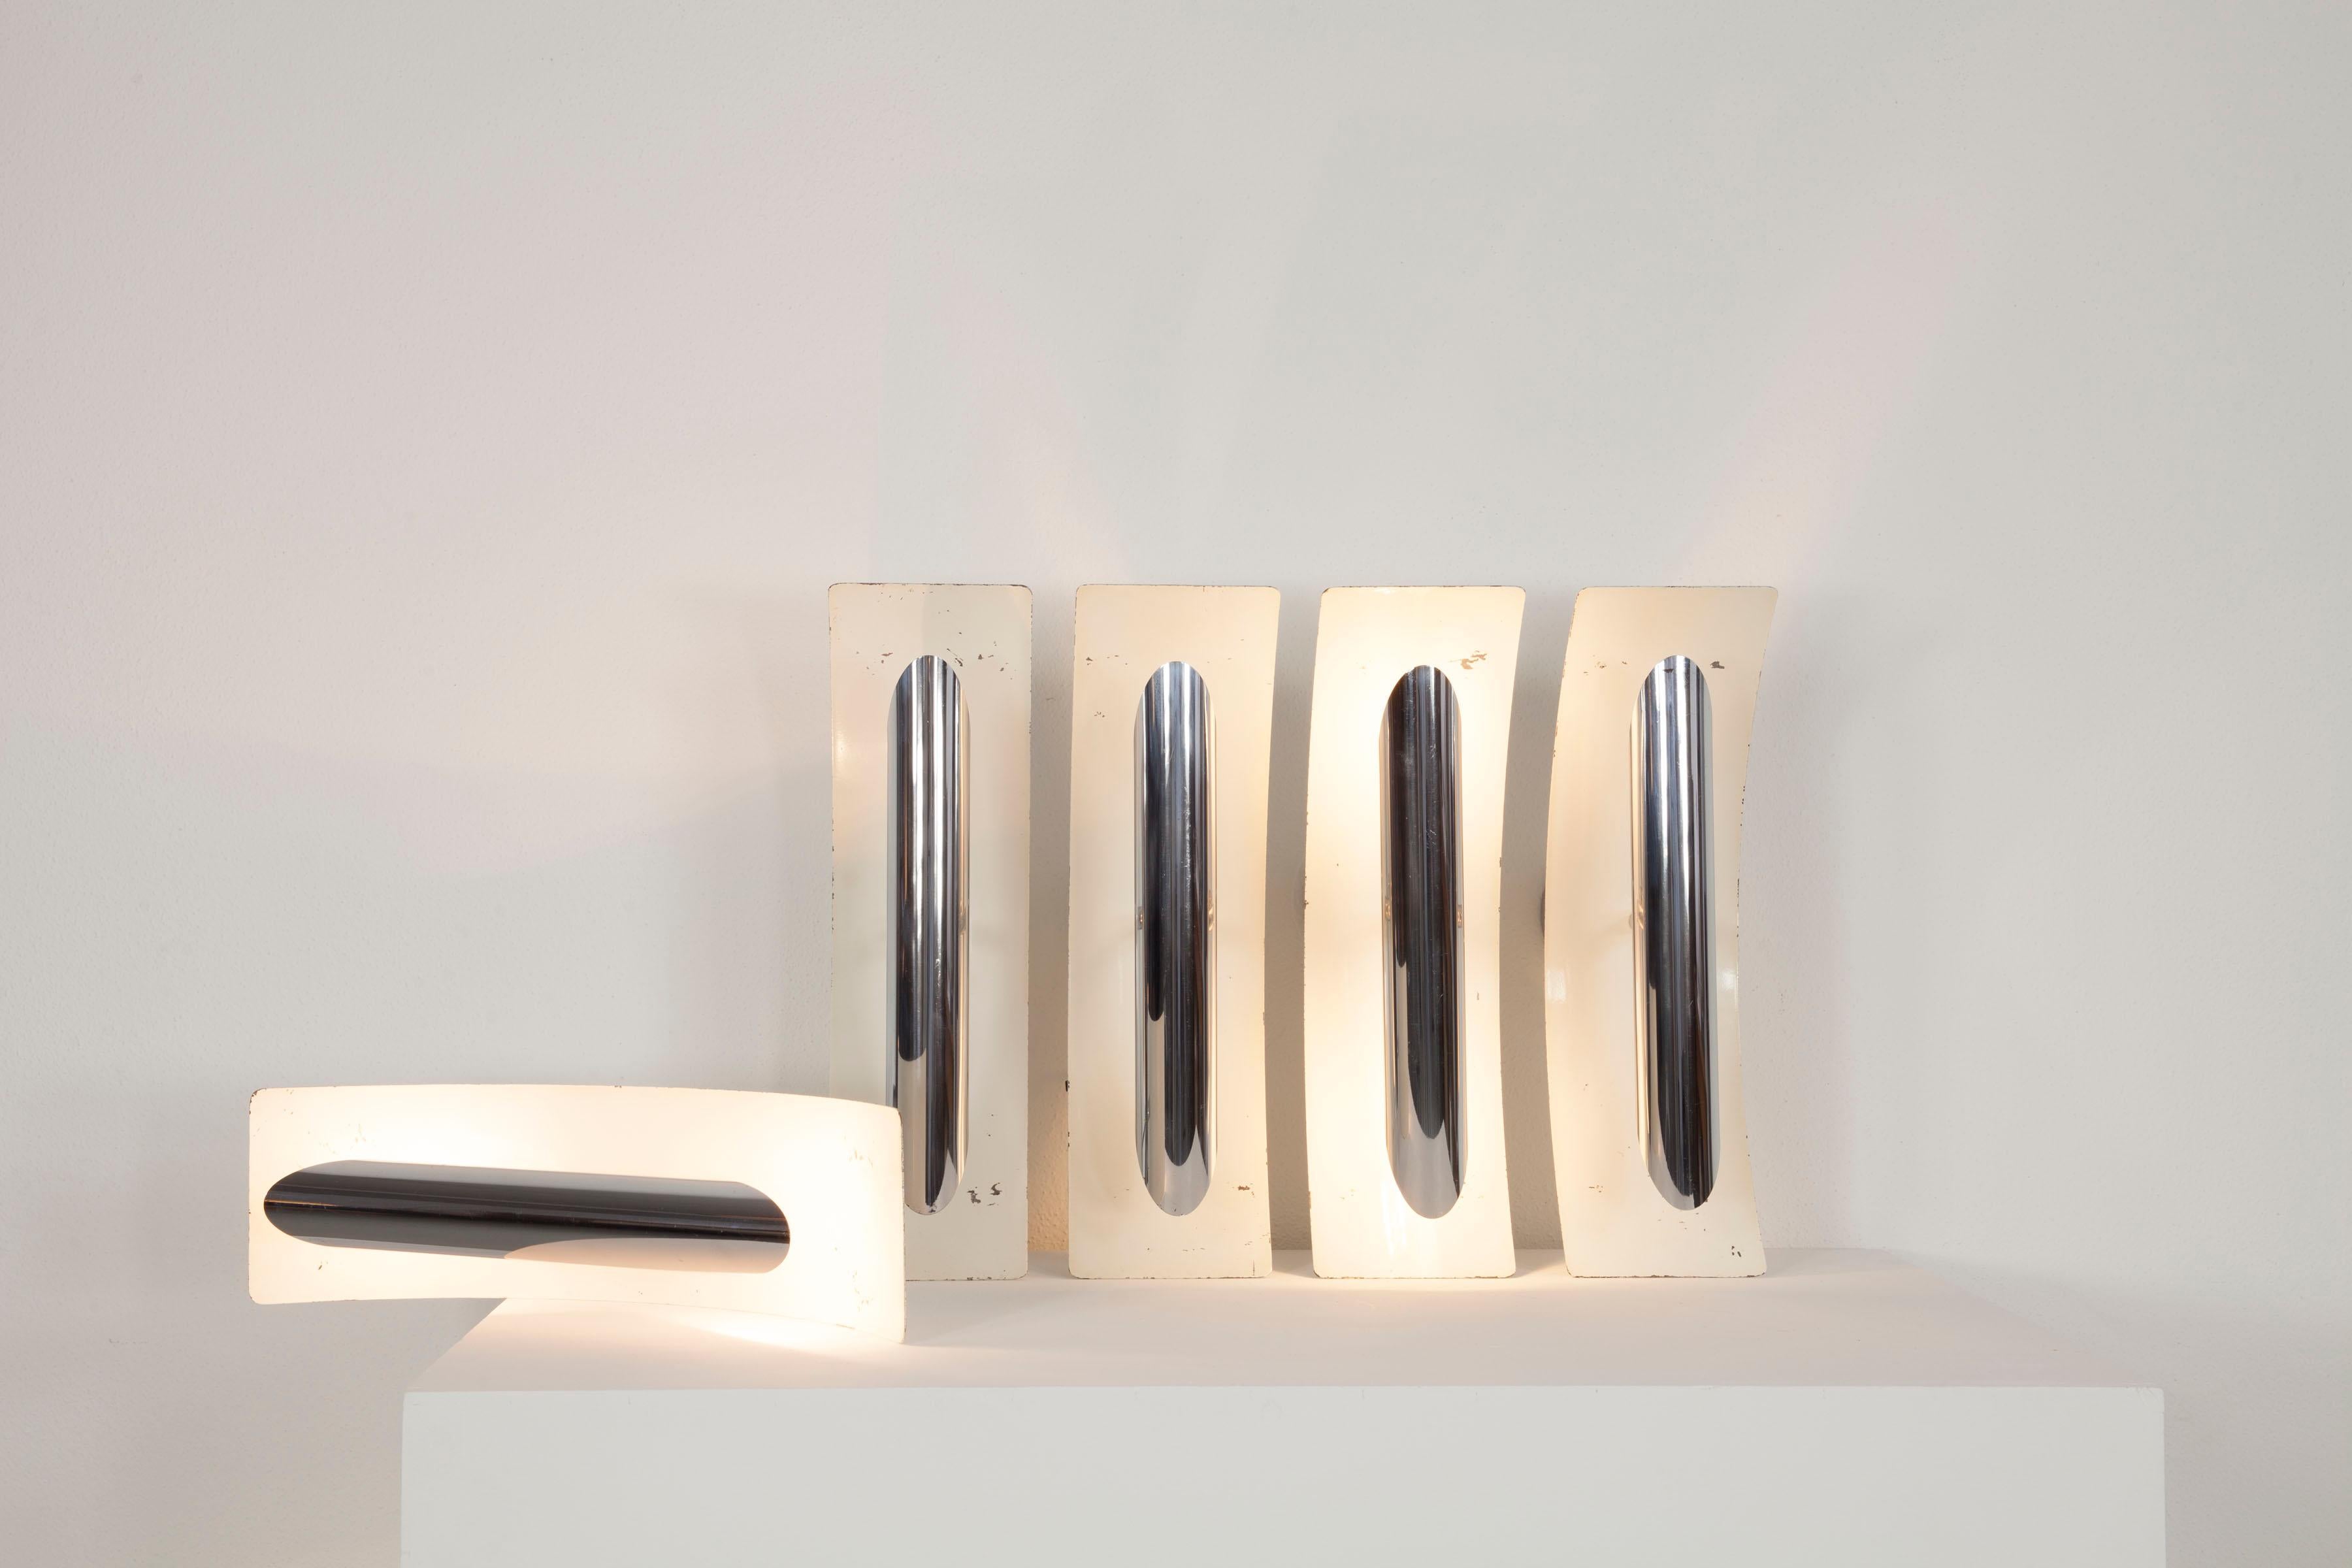 Set of 5 white lacquered aluminium and chrome wall lamp. Designed by Goffredo Reggiani, Italy 1970s

